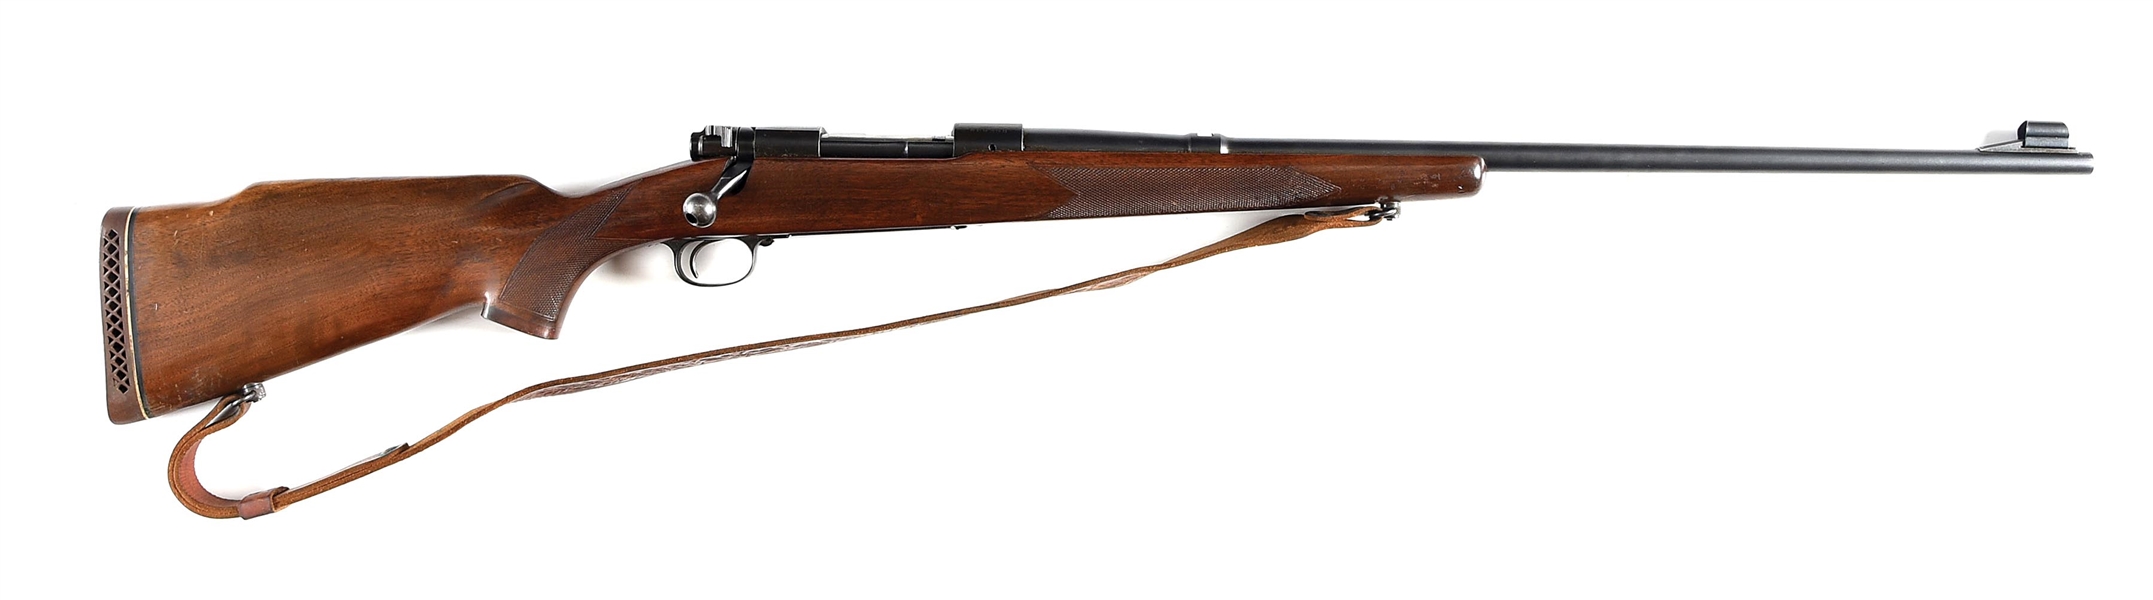 (C) PRE-64 WINCHESTER MODEL 70 WESTERNER .264 WIN MAG BOLT ACTION RIFLE.